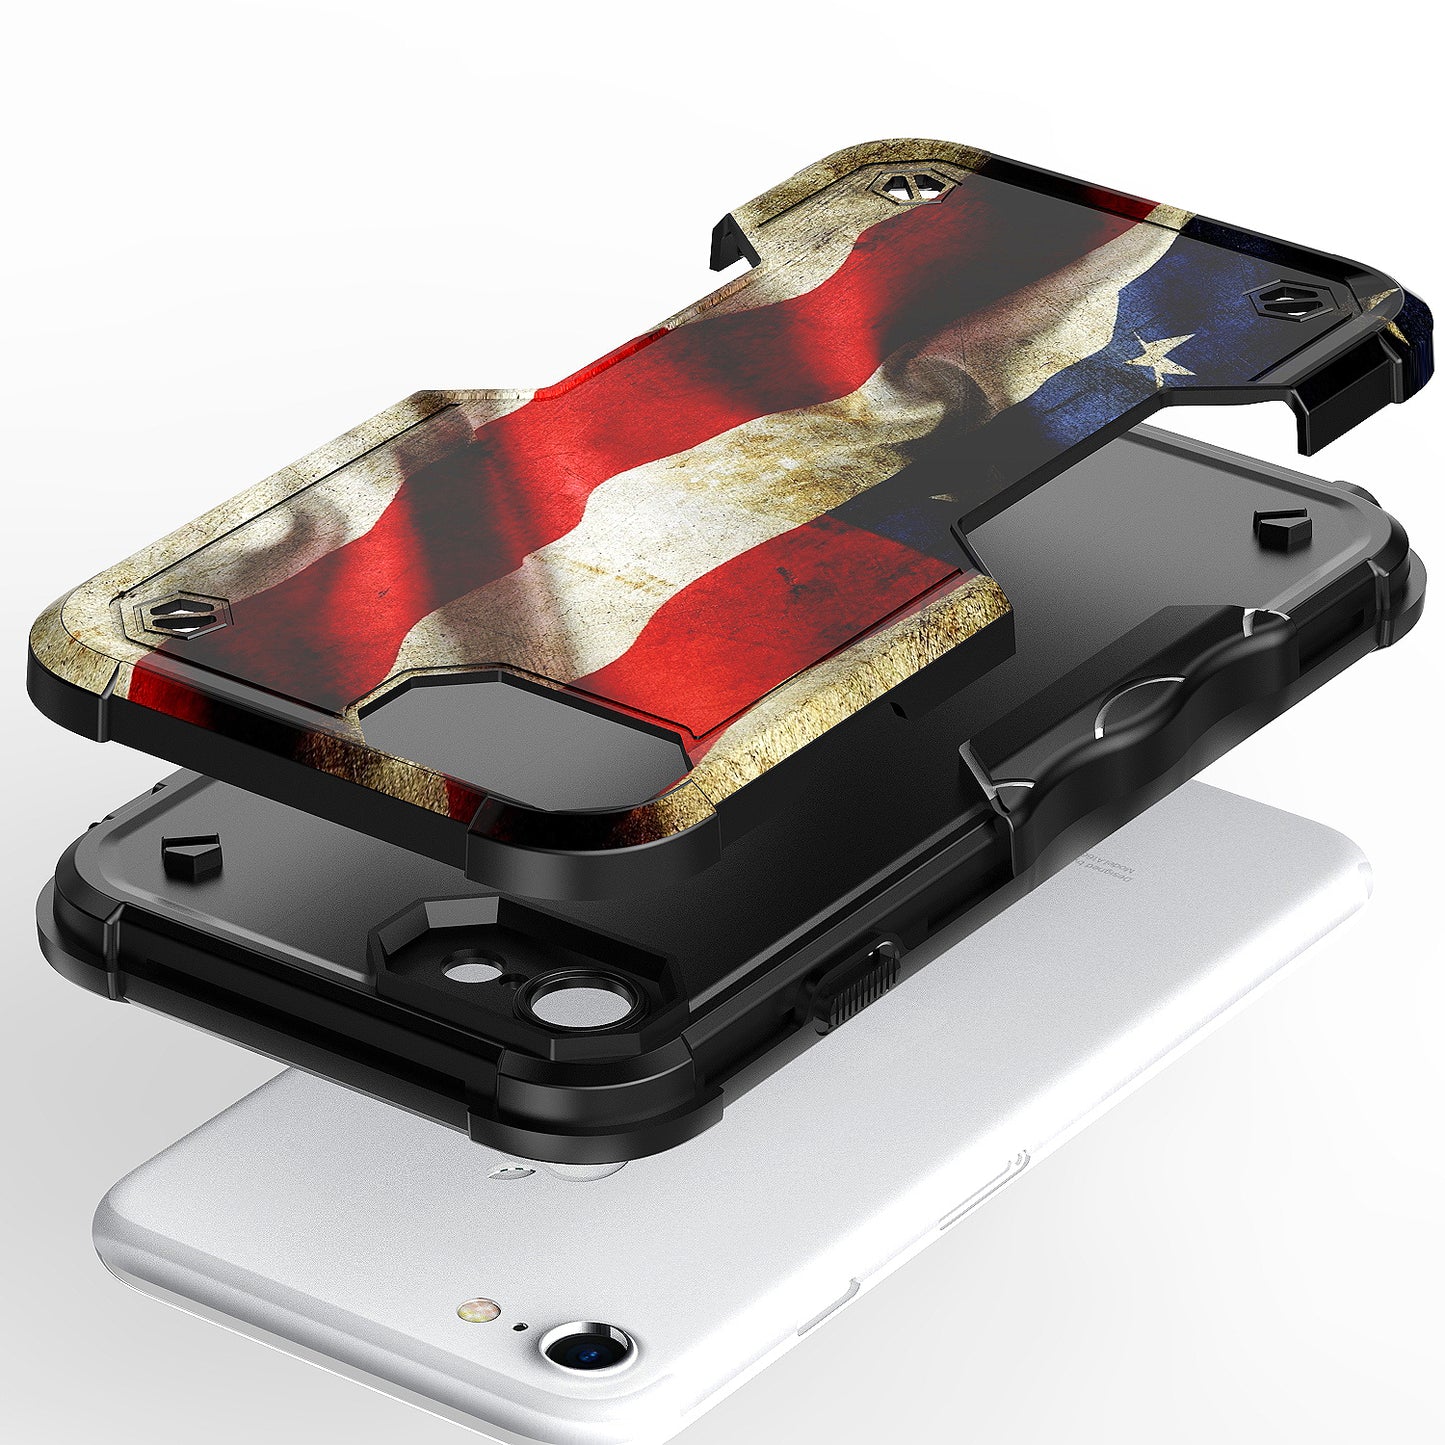 Case For Apple iPhone 7 - Hybrid Grip Design Shockproof Phone Cover - American Flag